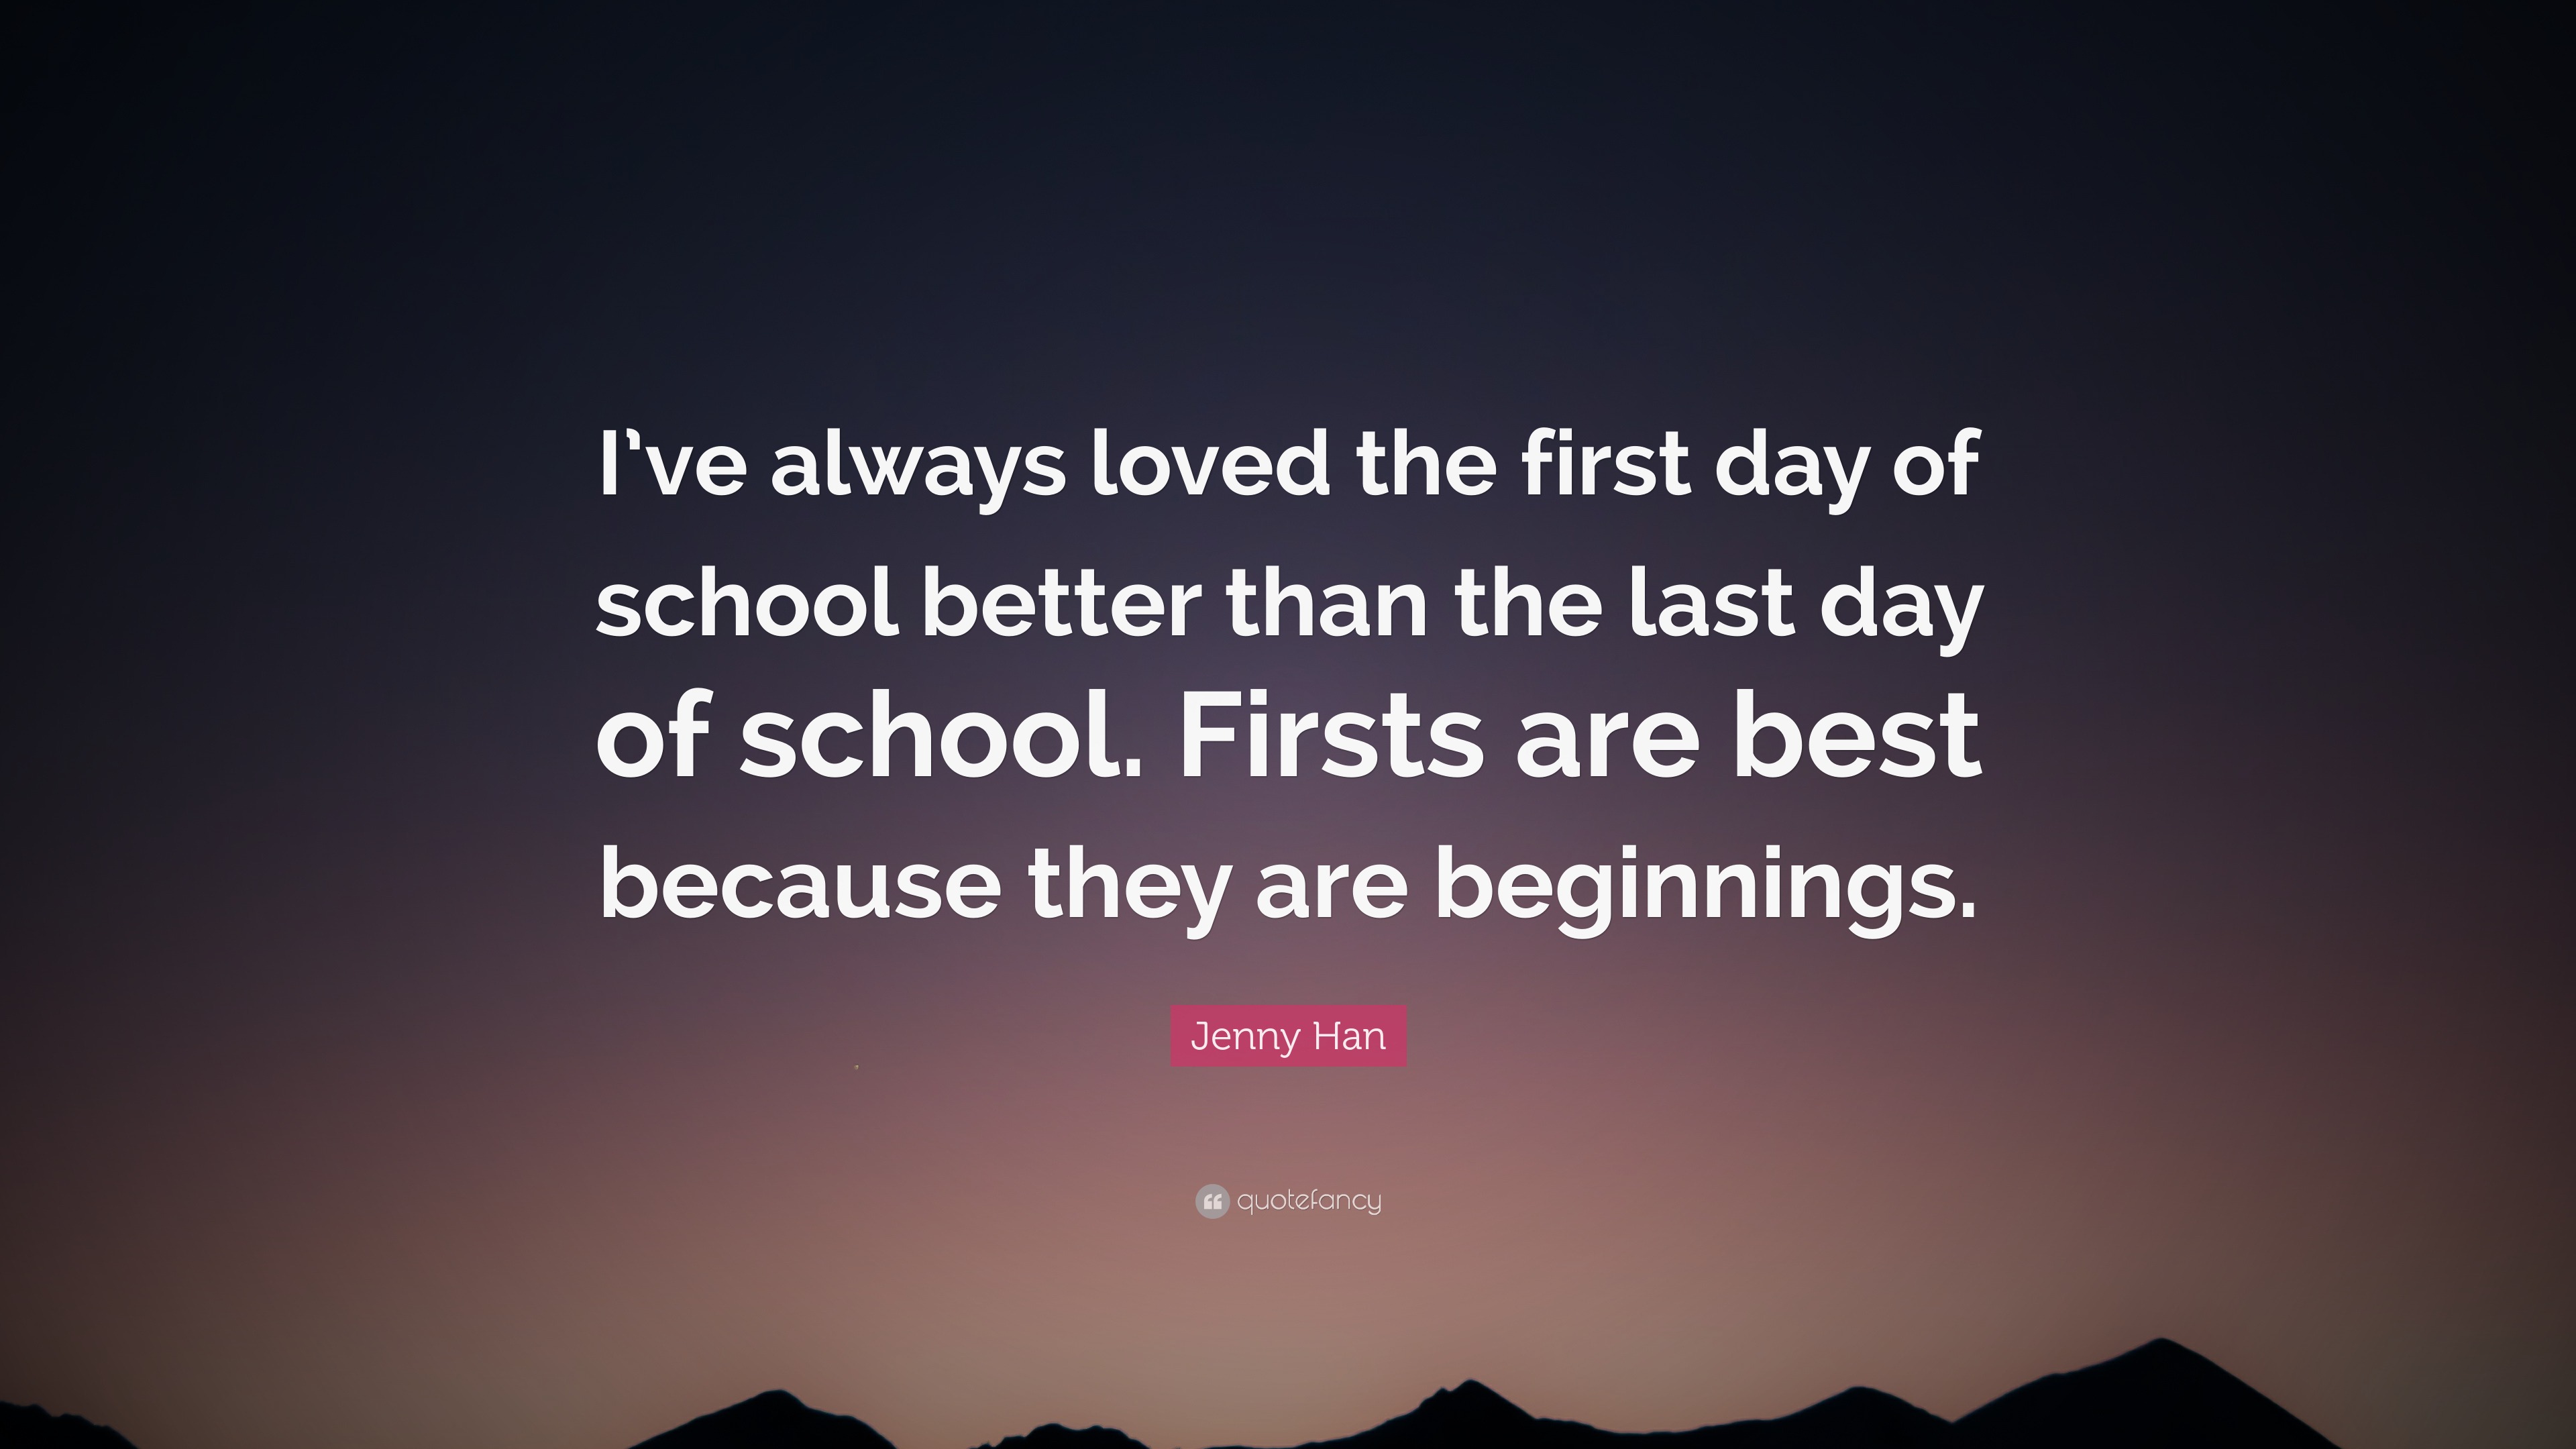 Jenny Han Quote “I’ve always loved the first day of school better than